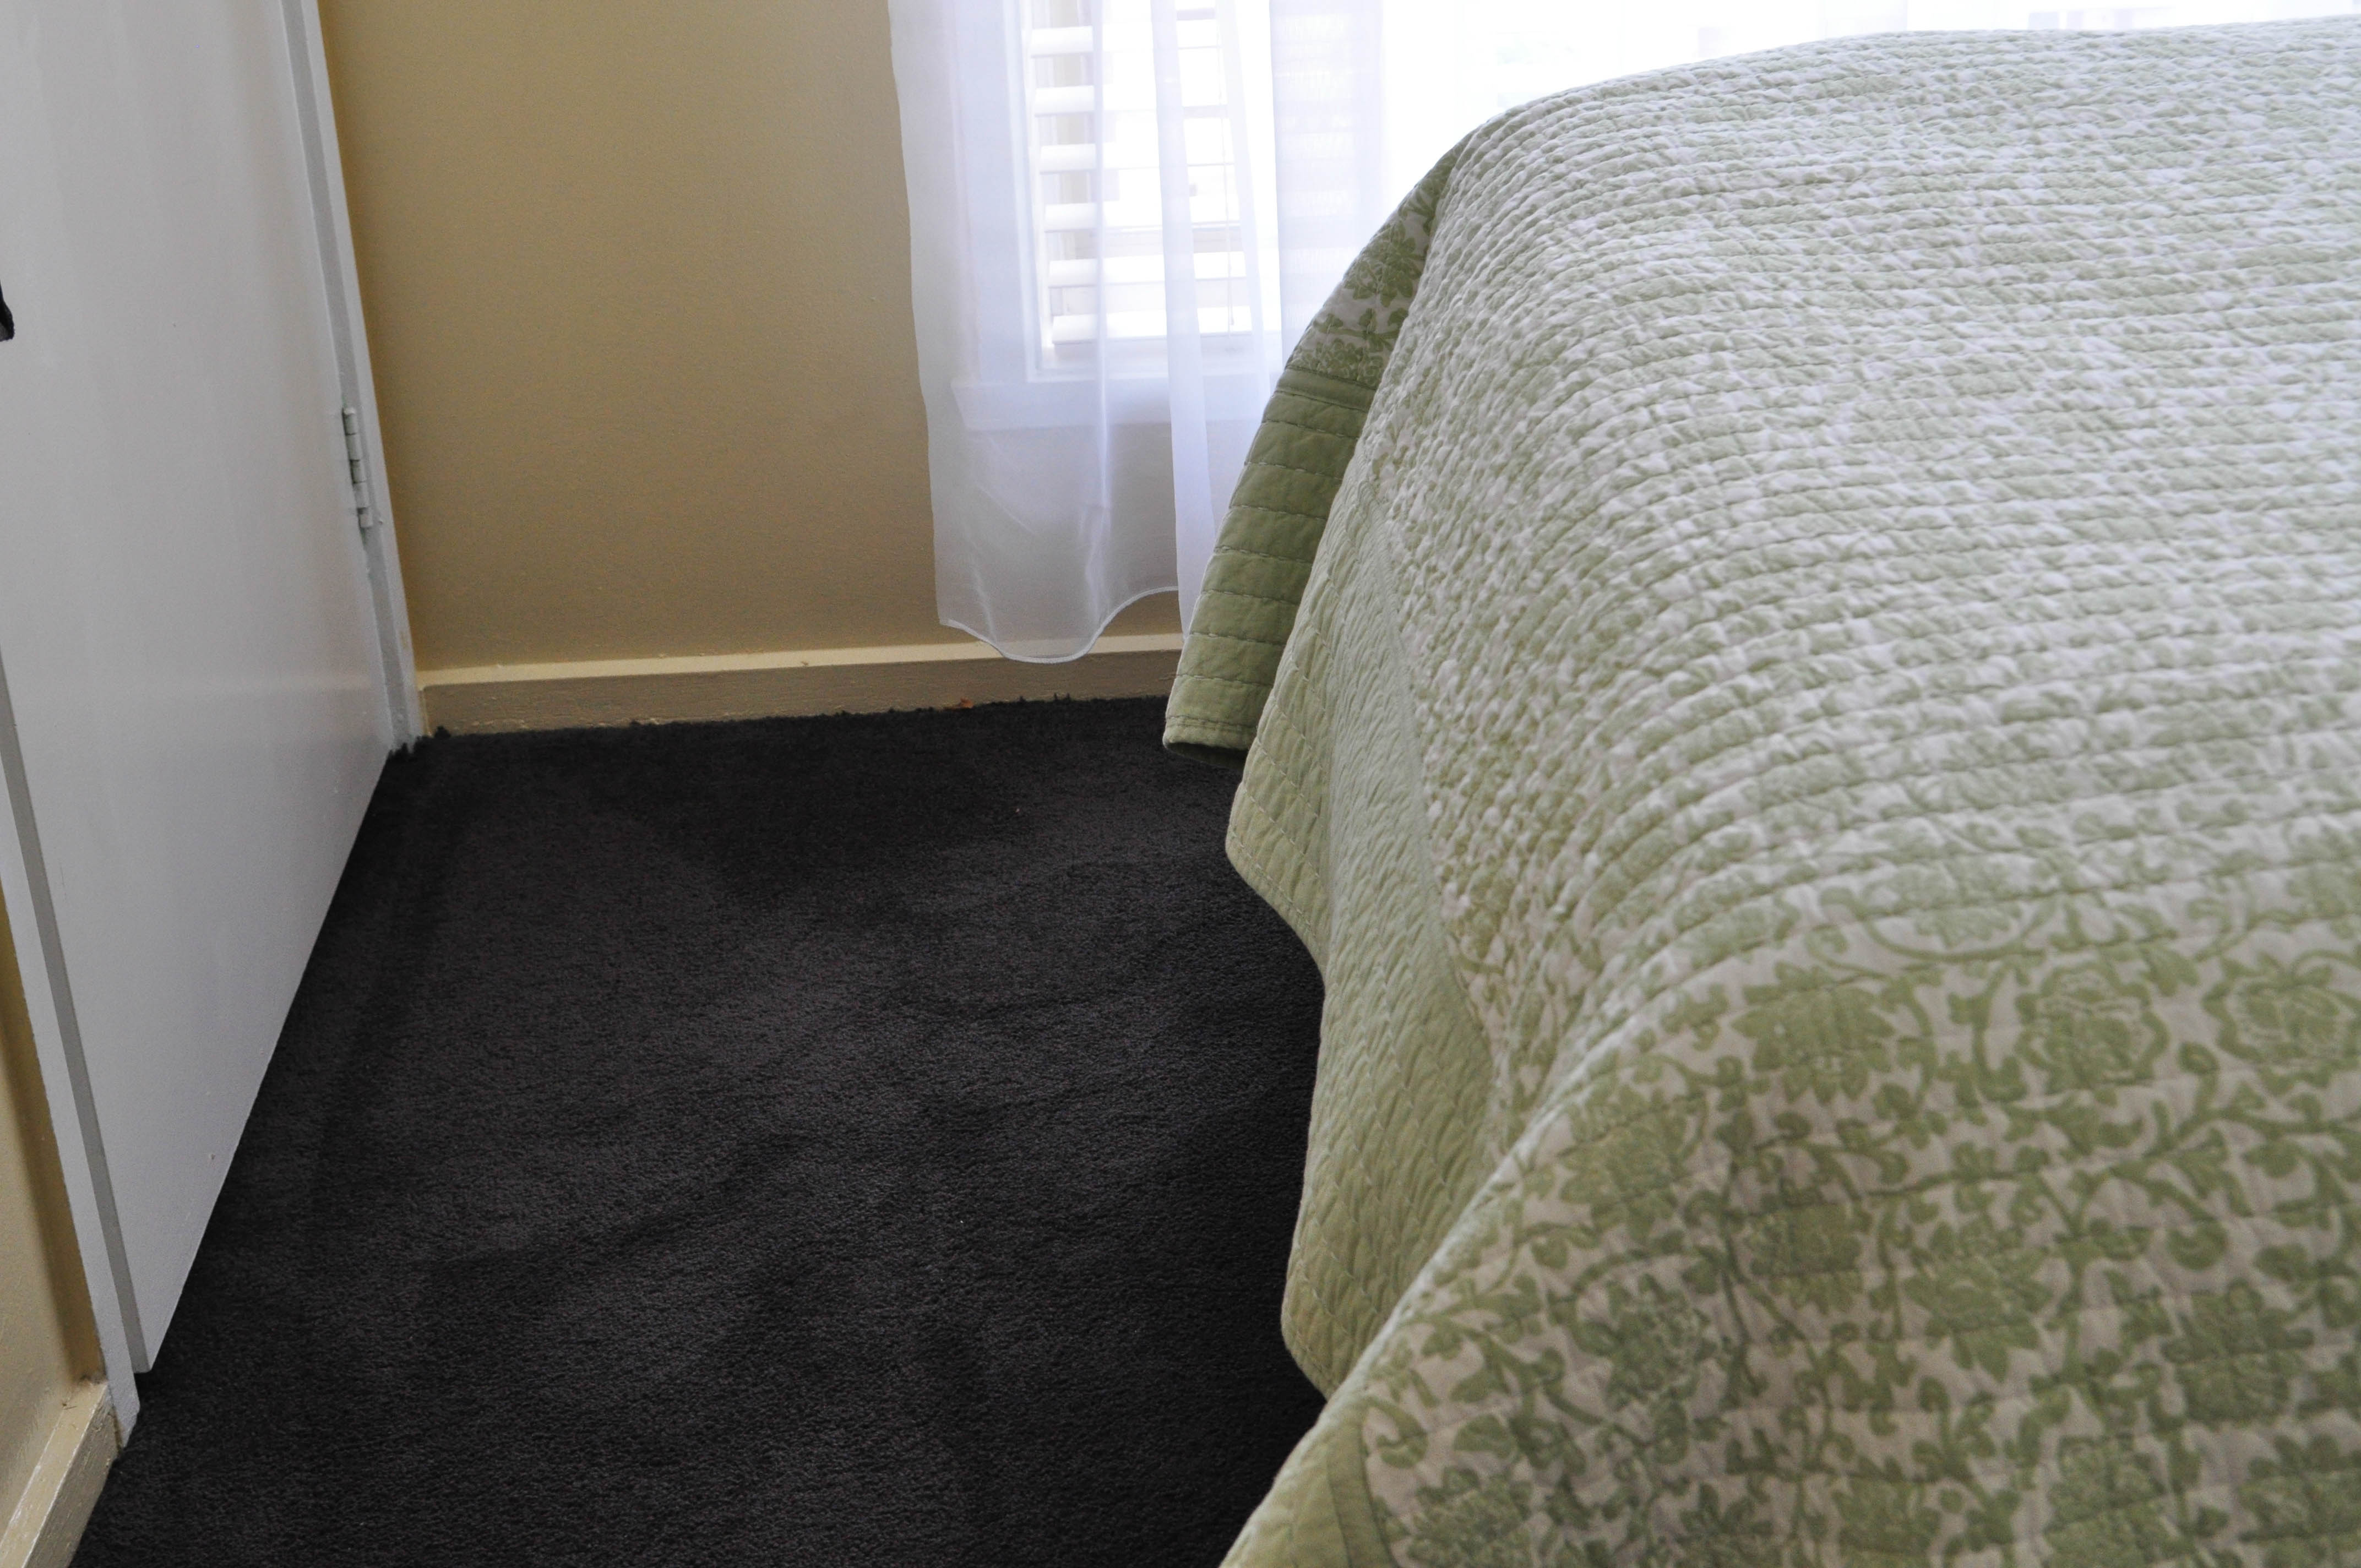 showing a room in house in Altona Meadows, with a bed in it, and it's floor carpeted by a, black coloured plush pile, nylon yarn carpet, installed by Concord Floors.